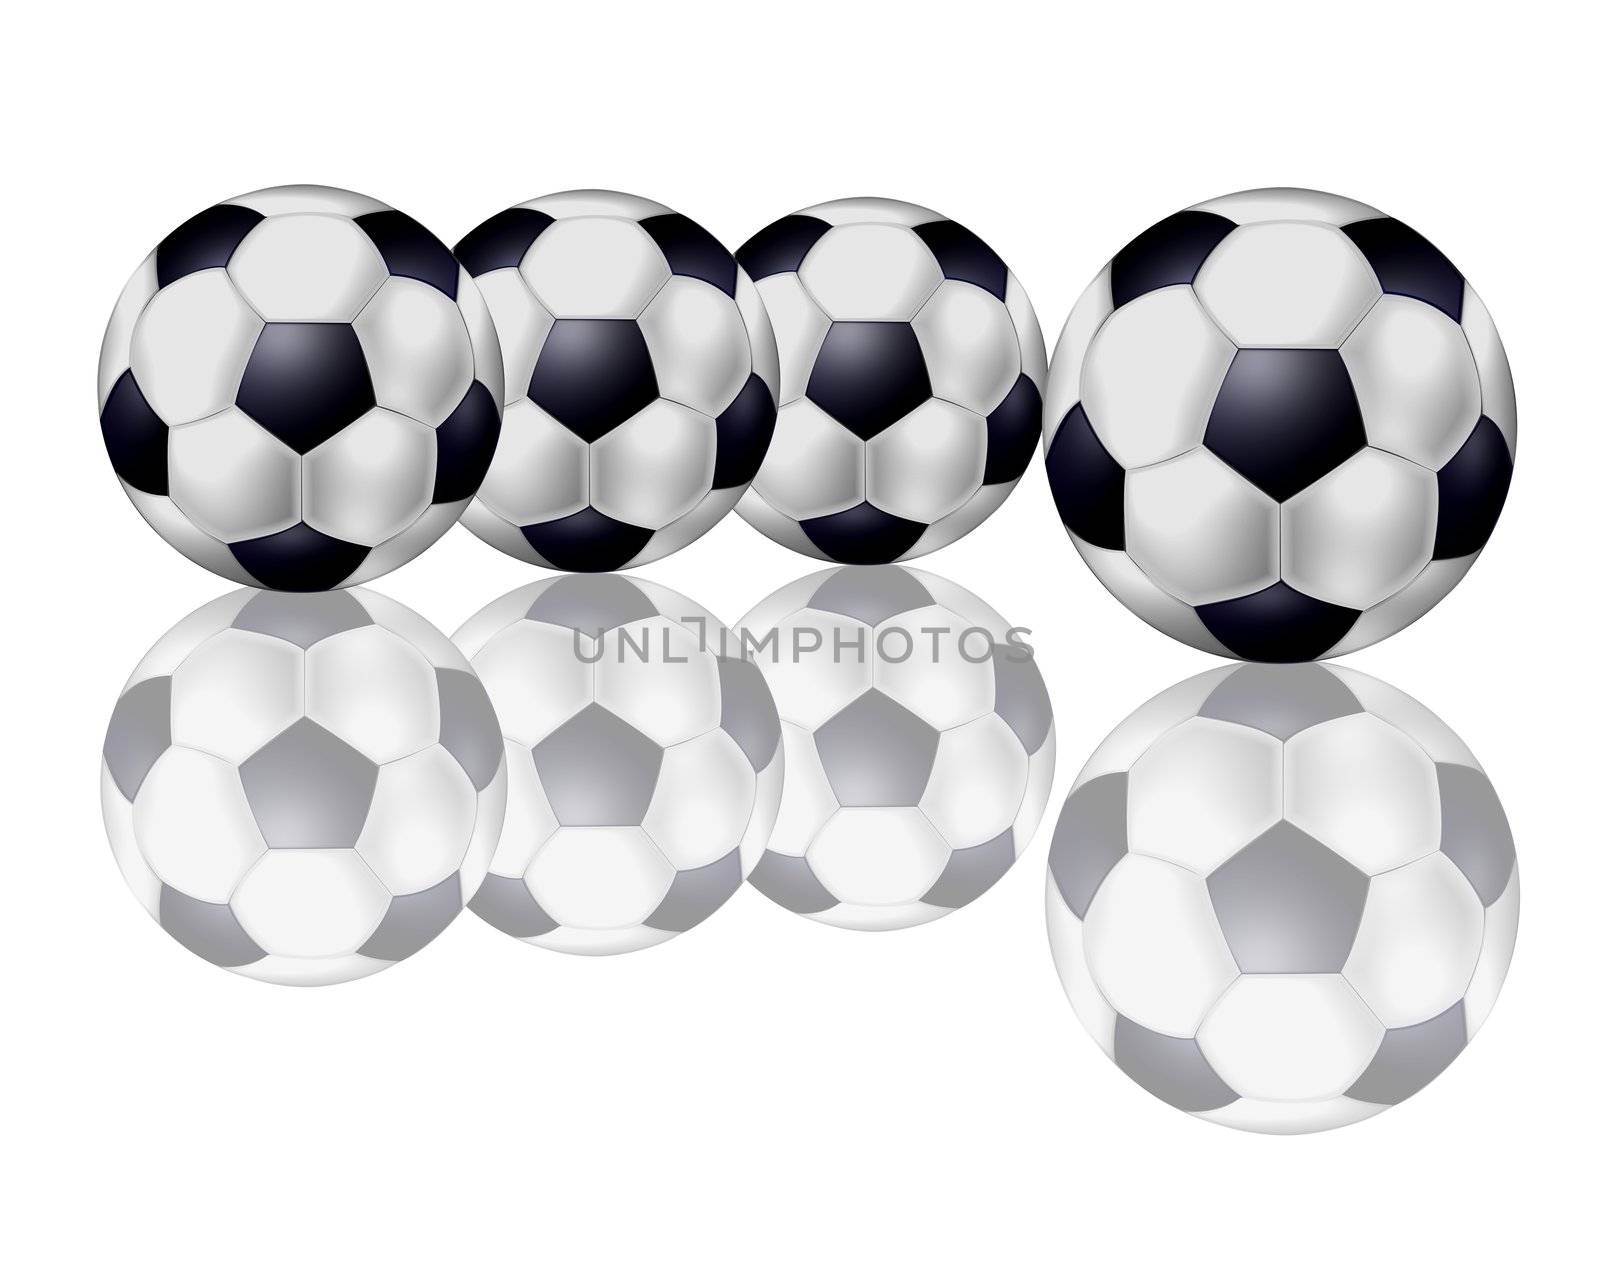 4 soccer balls on white background by peromarketing